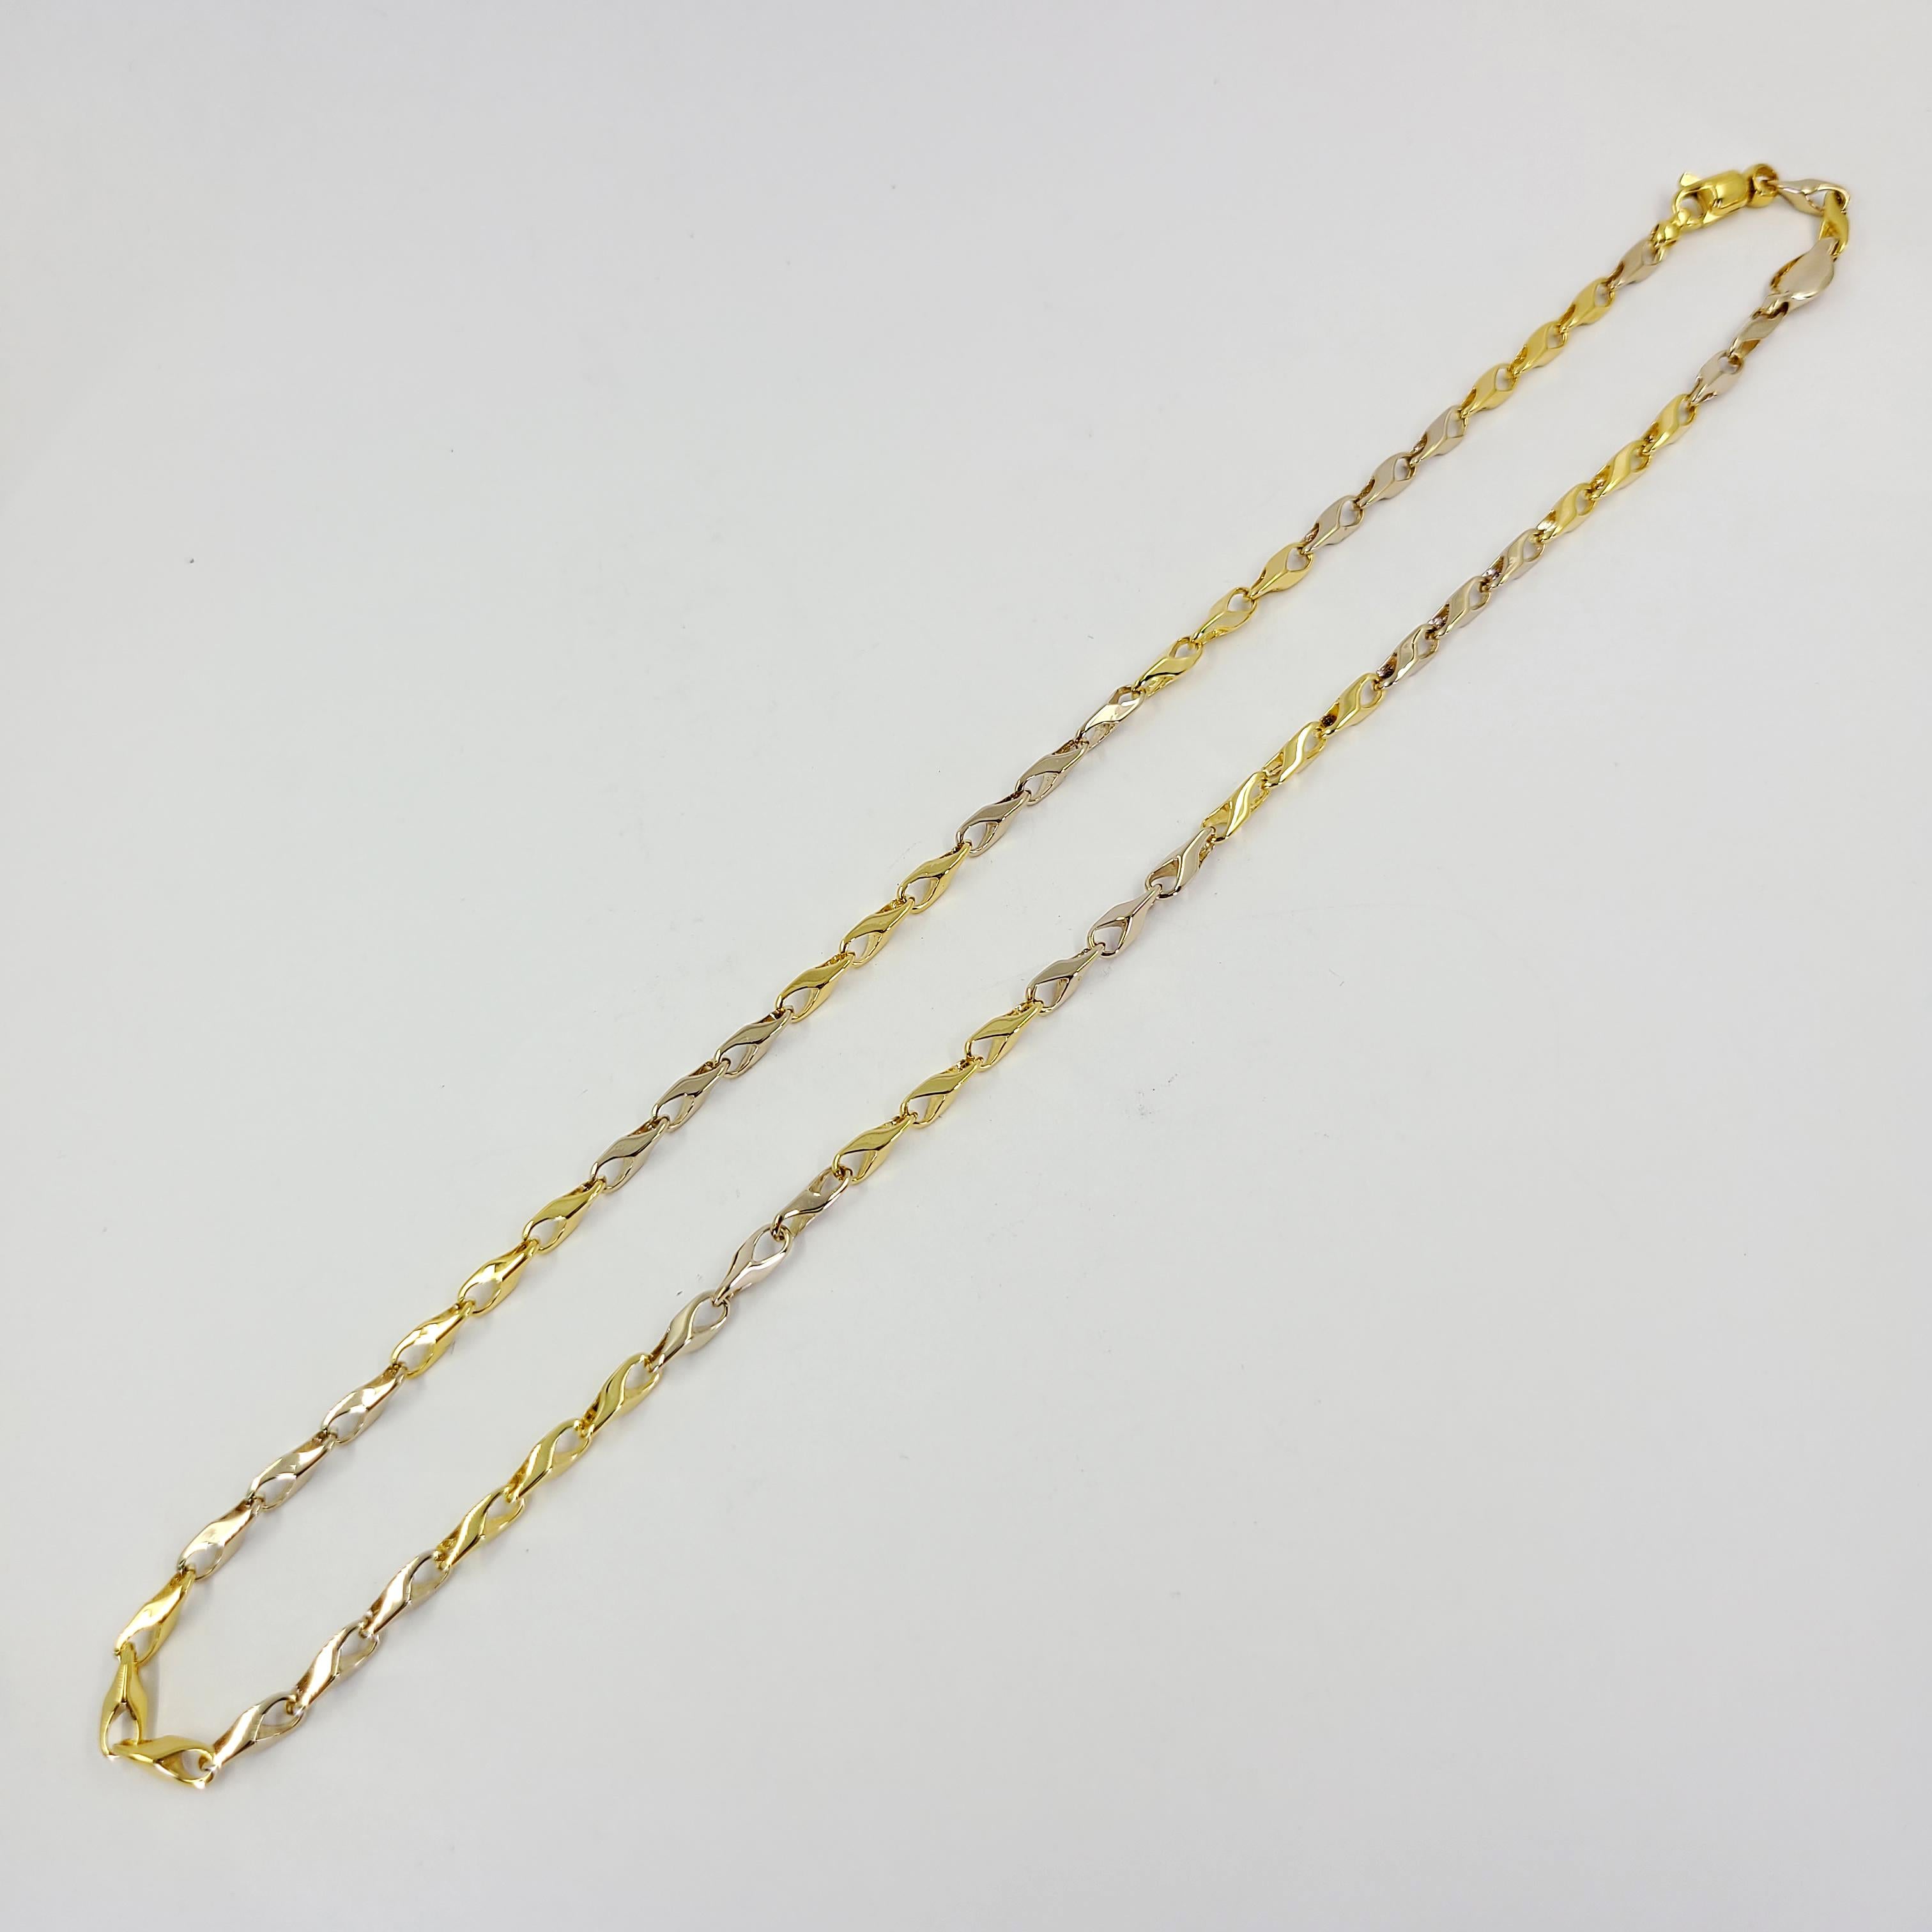 18 Karat White and Yellow Gold Italian High Polish Link Chain Measuring 19 Inches Long with Swiveling Lobster Clasp. Finished Weight Is 26.8 Grams.